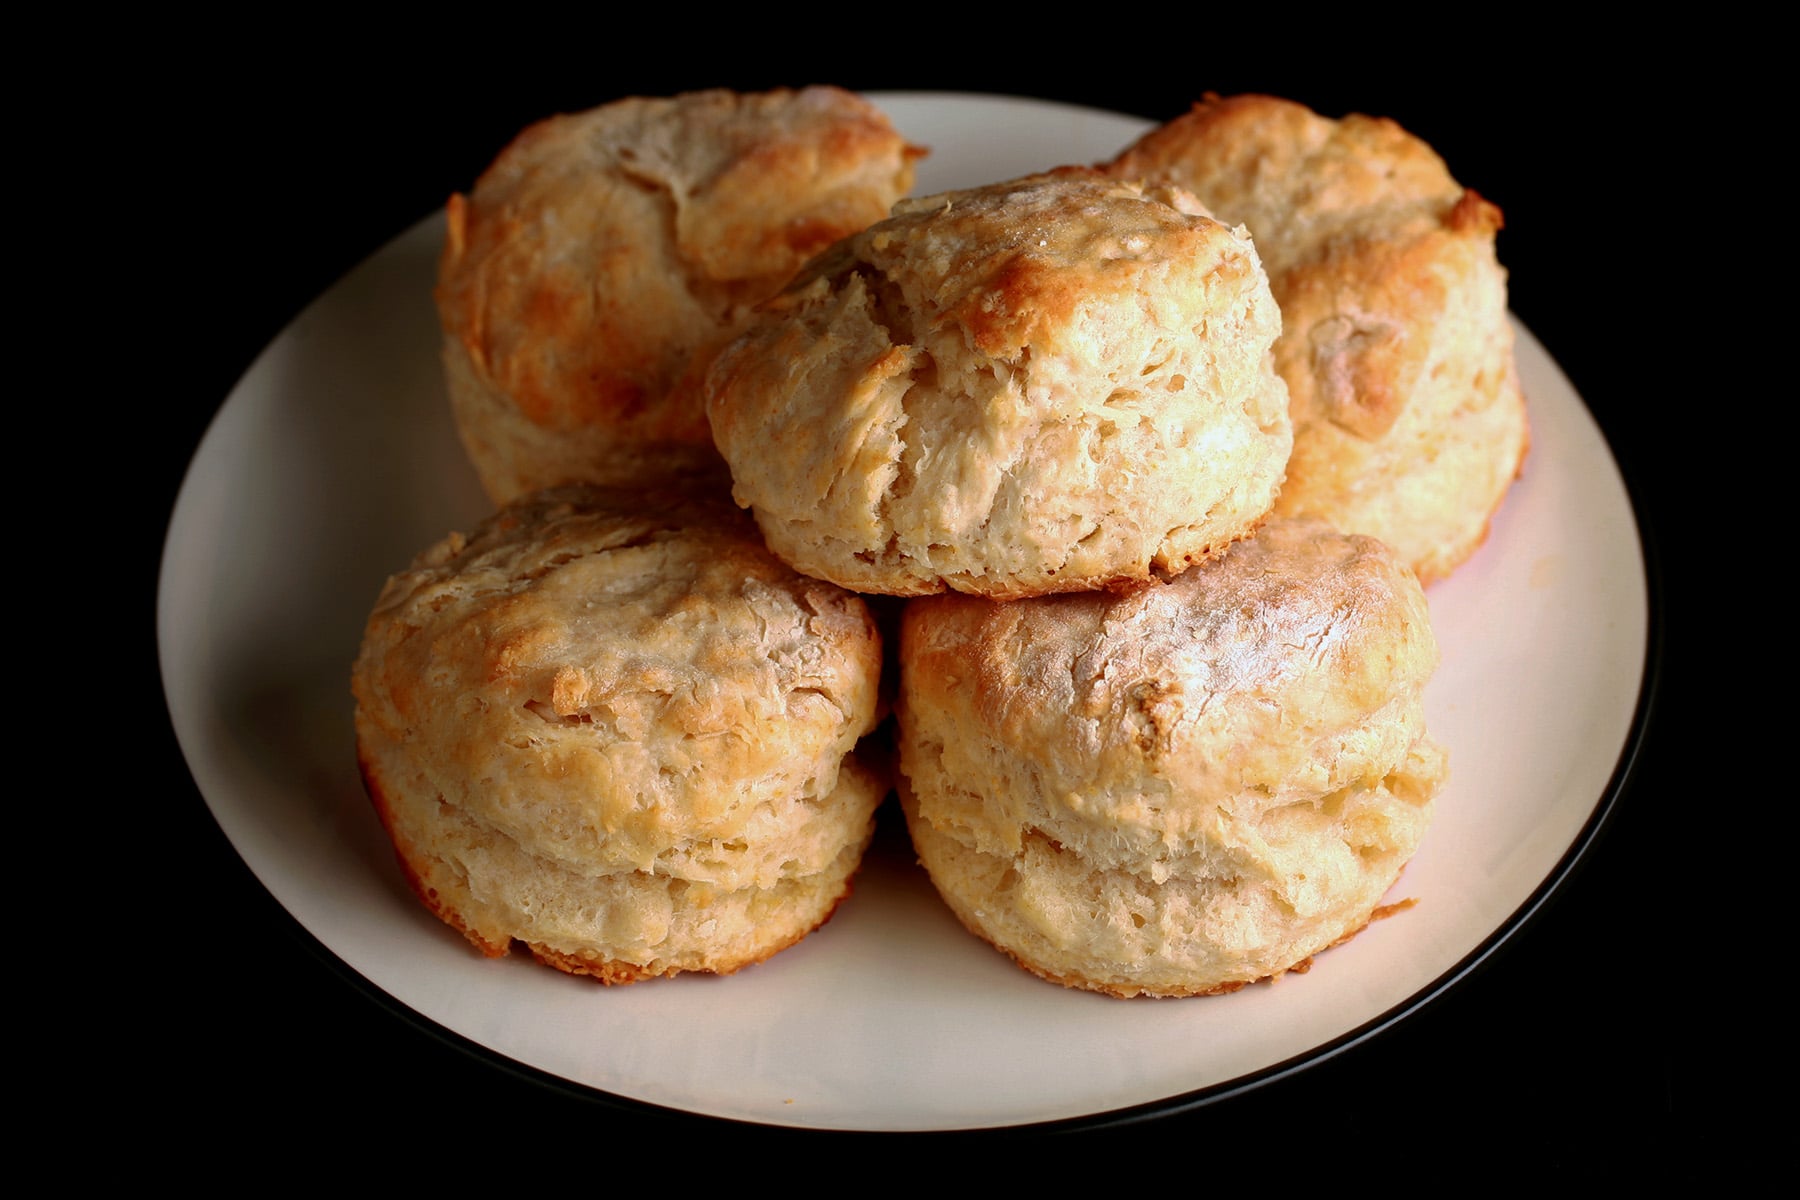 A close up view of several golden baking powder buttermilk biscuits on a plate.